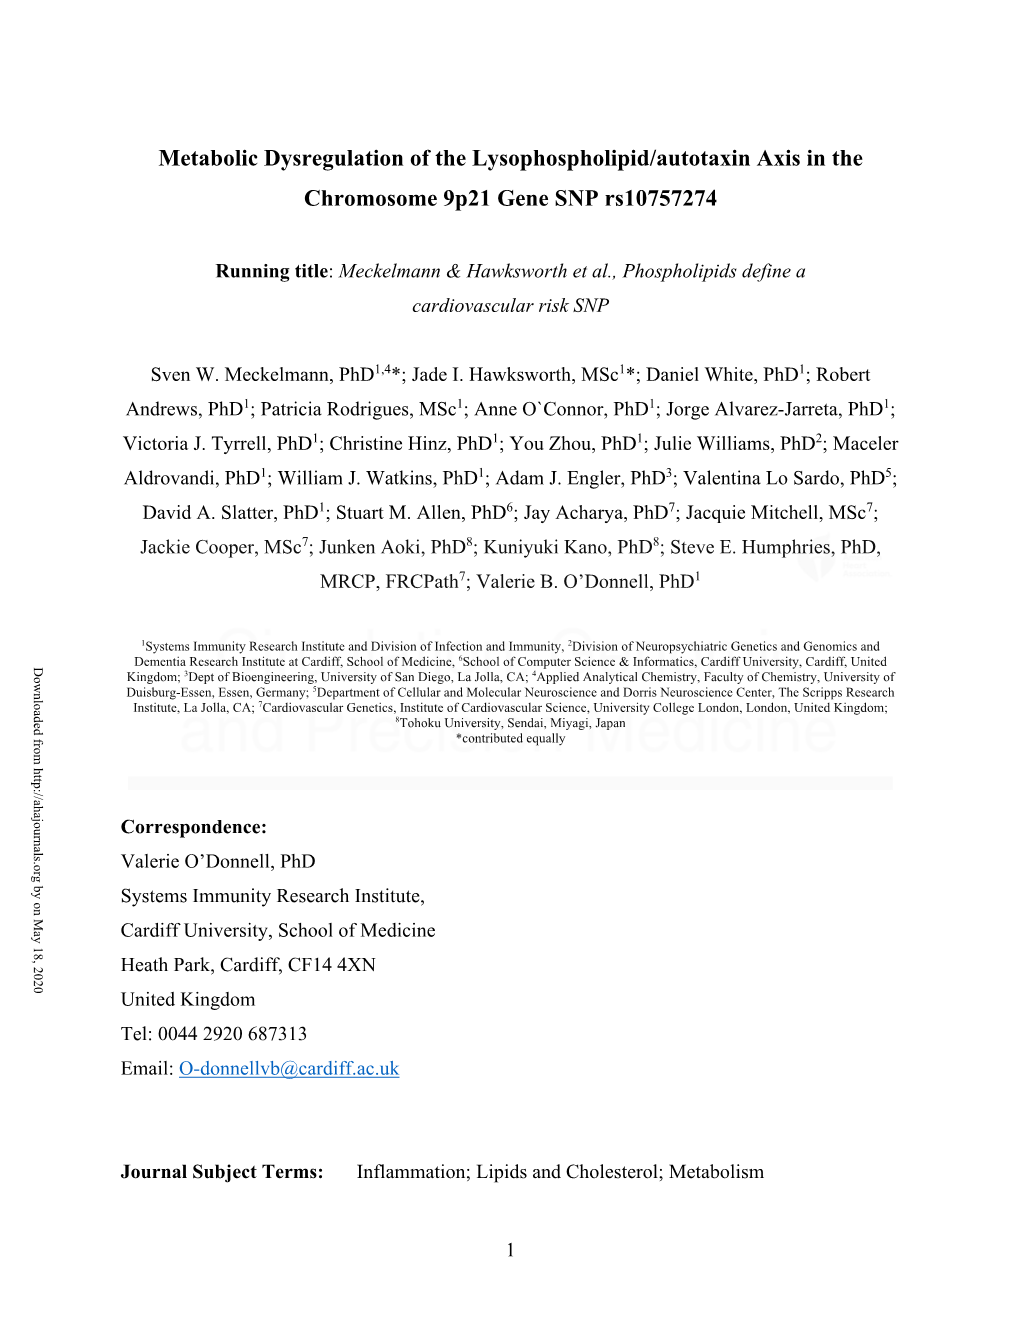 Metabolic Dysregulation of the Lysophospholipid/Autotaxin Axis in the Chromosome 9P21 Gene SNP Rs10757274